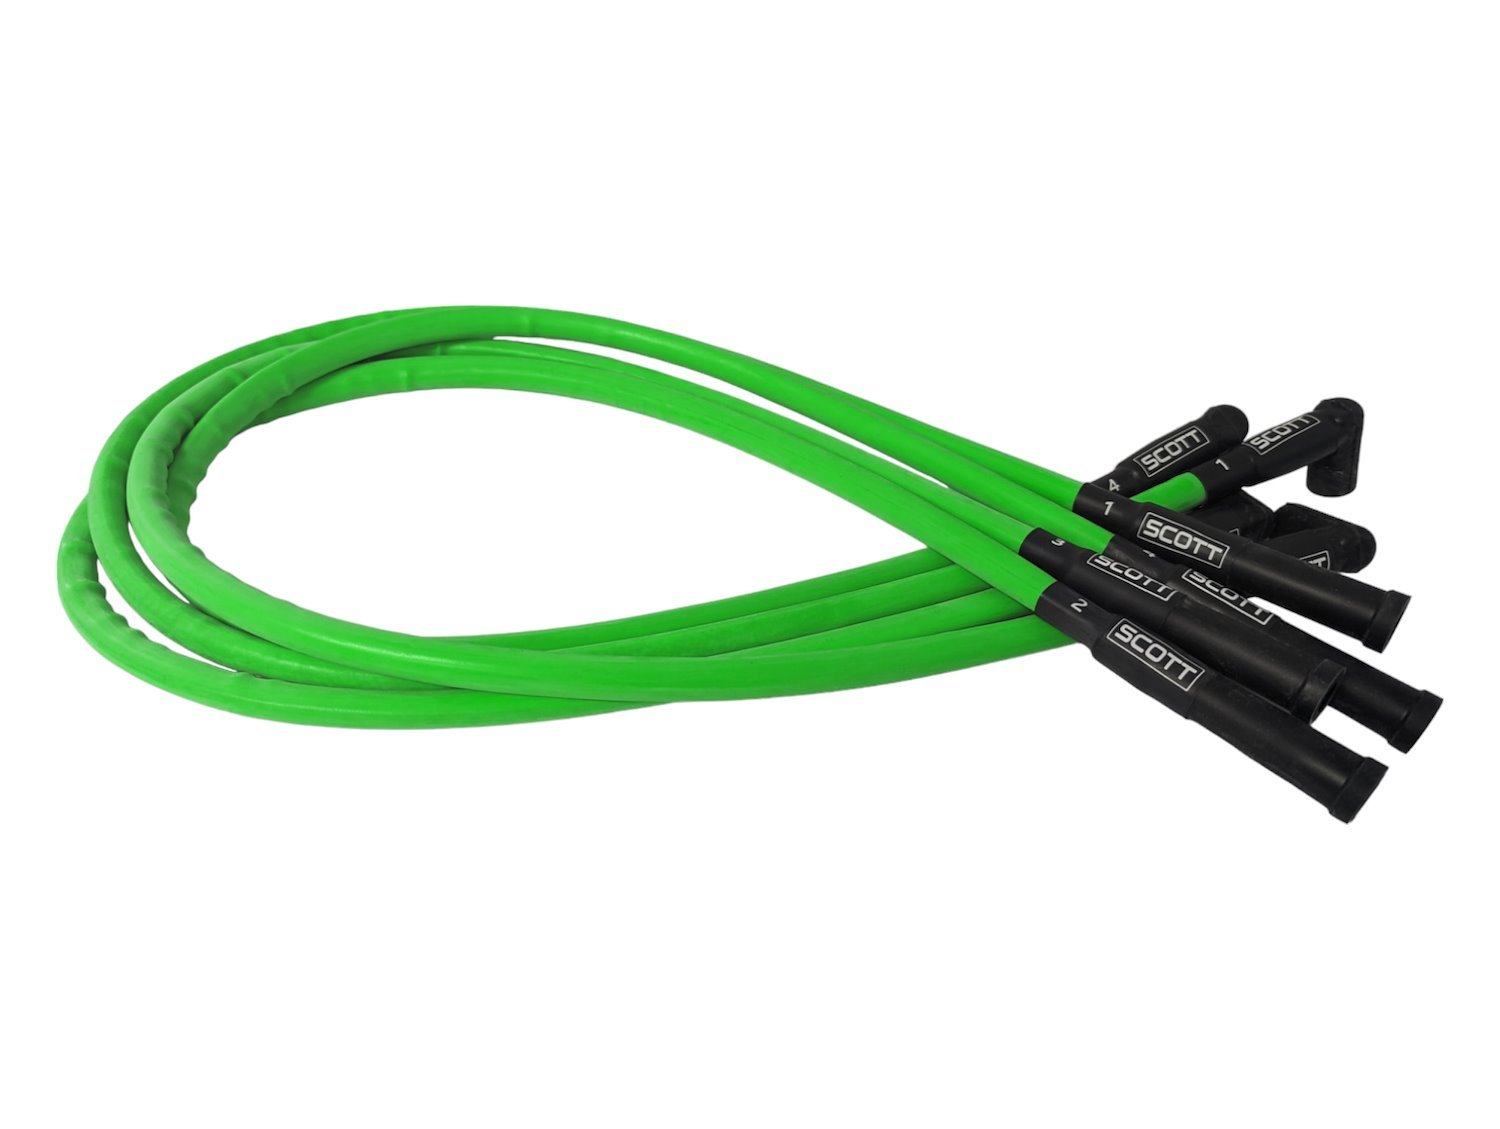 SPW-CH-23-8 High-Performance Silicone-Sleeved Spark Plug Wire Set for Ford 2.3L [Fluorescent Green]